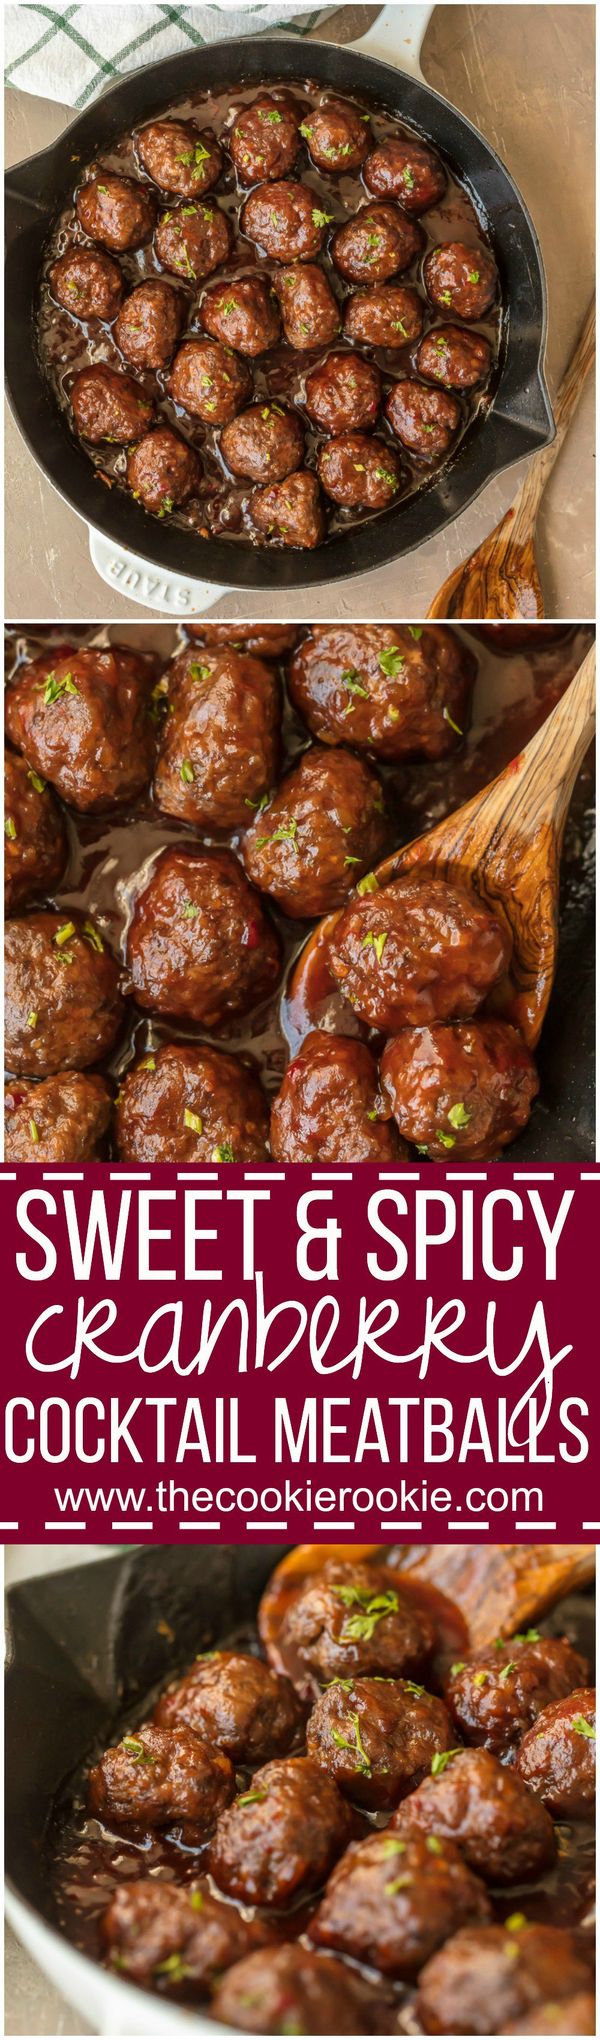 Sweet and Spicy Cranberry Cocktail Meatballs